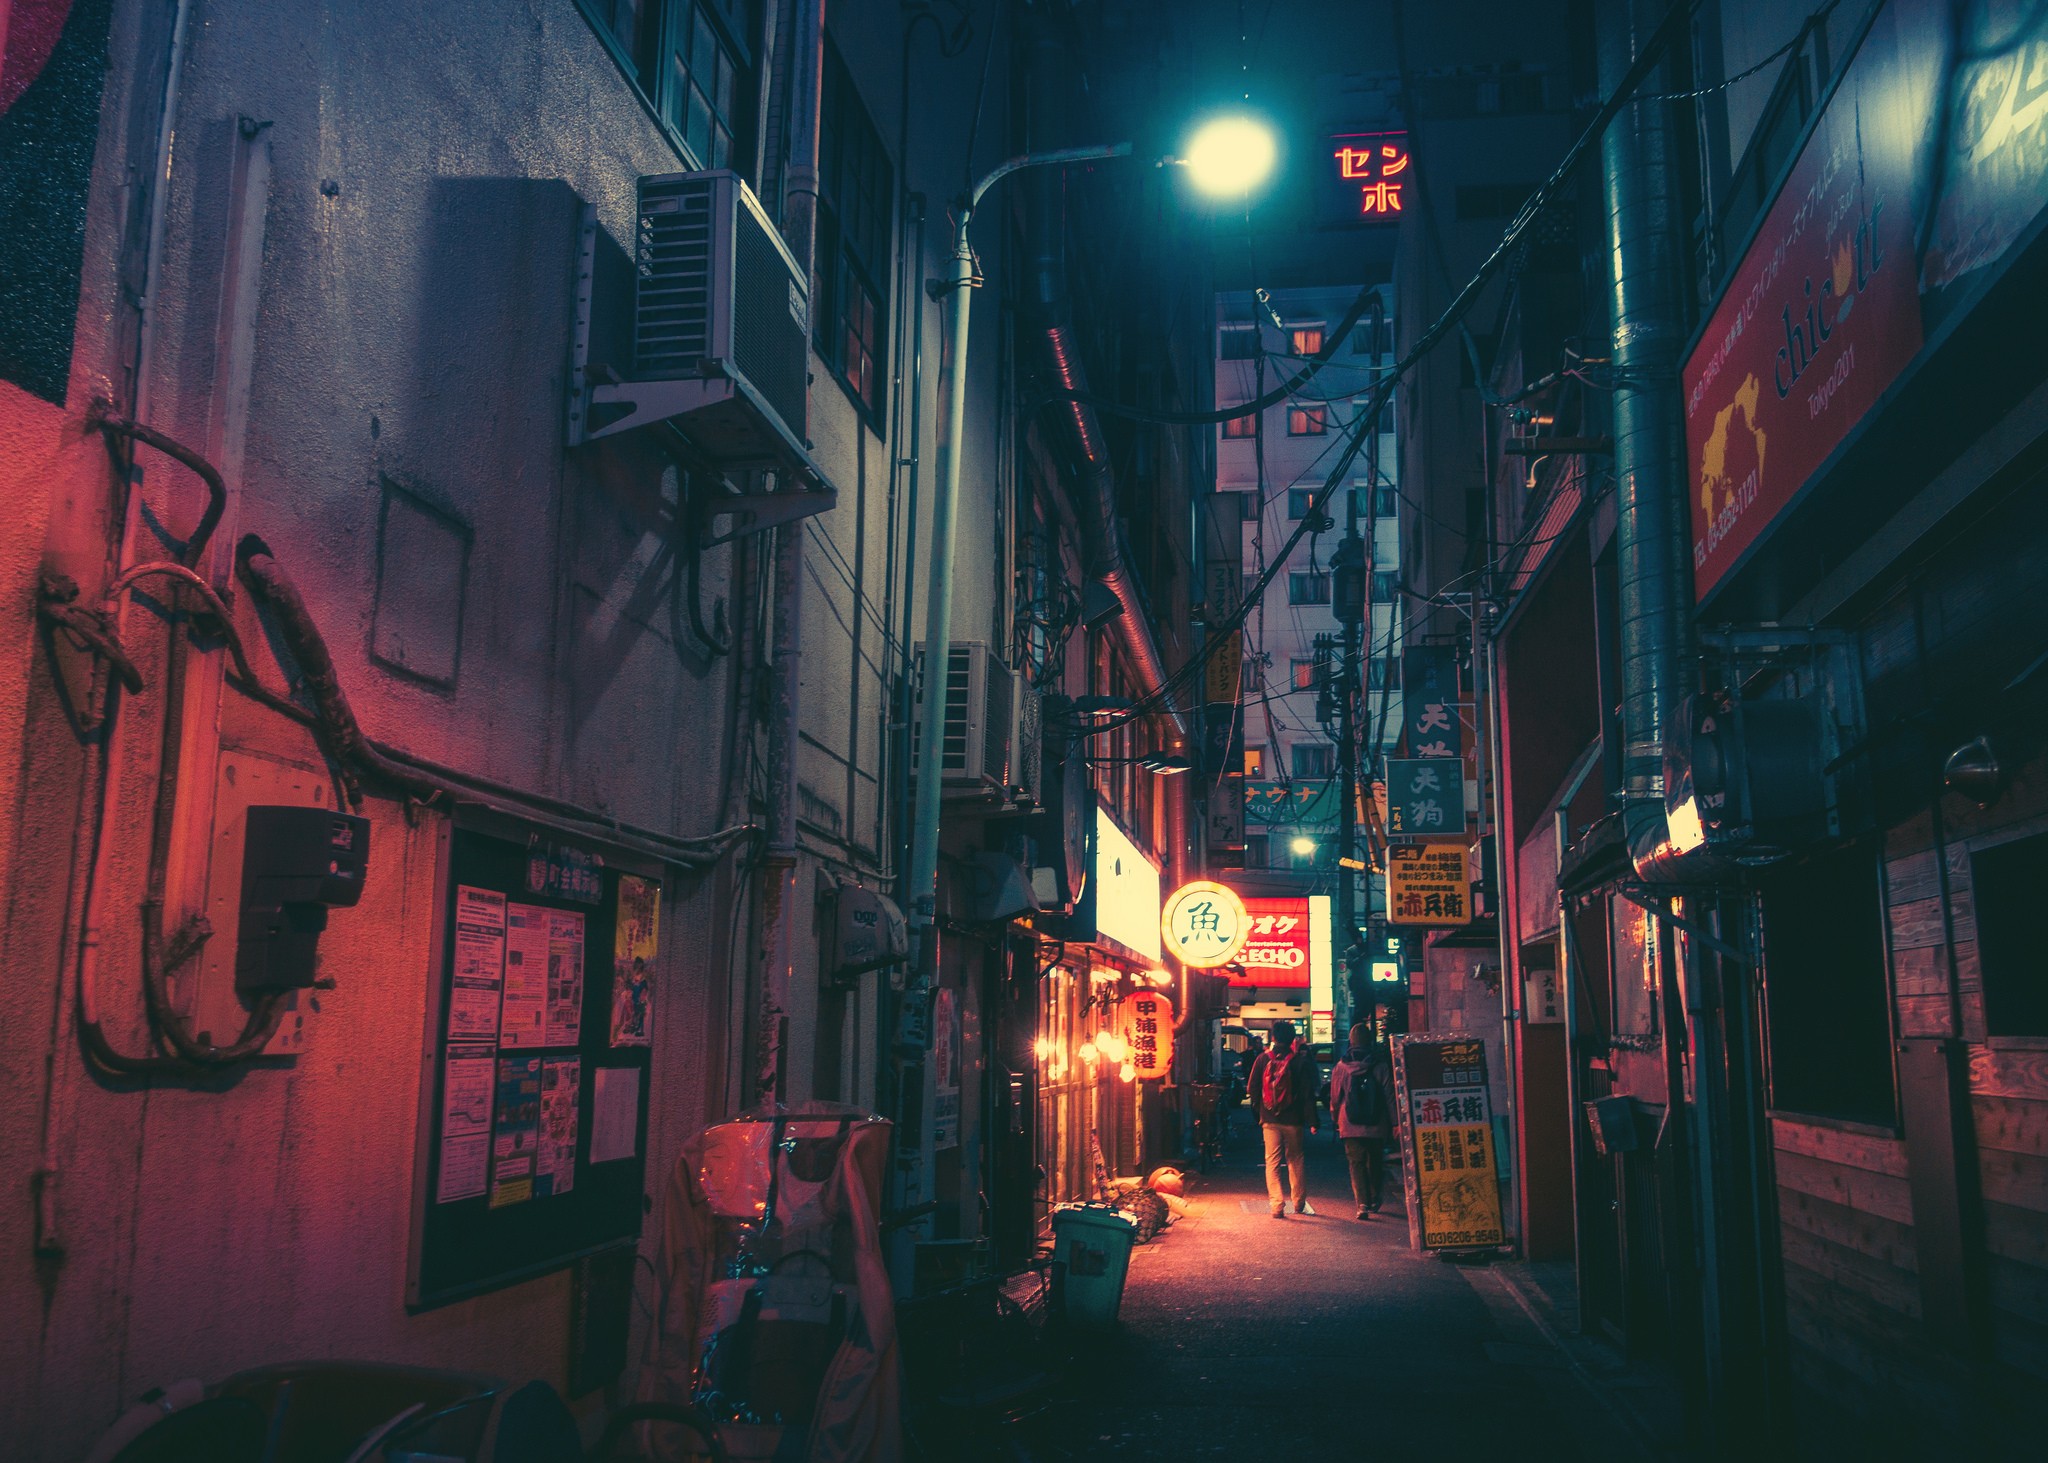 japan, neon, man made, city, alley, building, light, cities